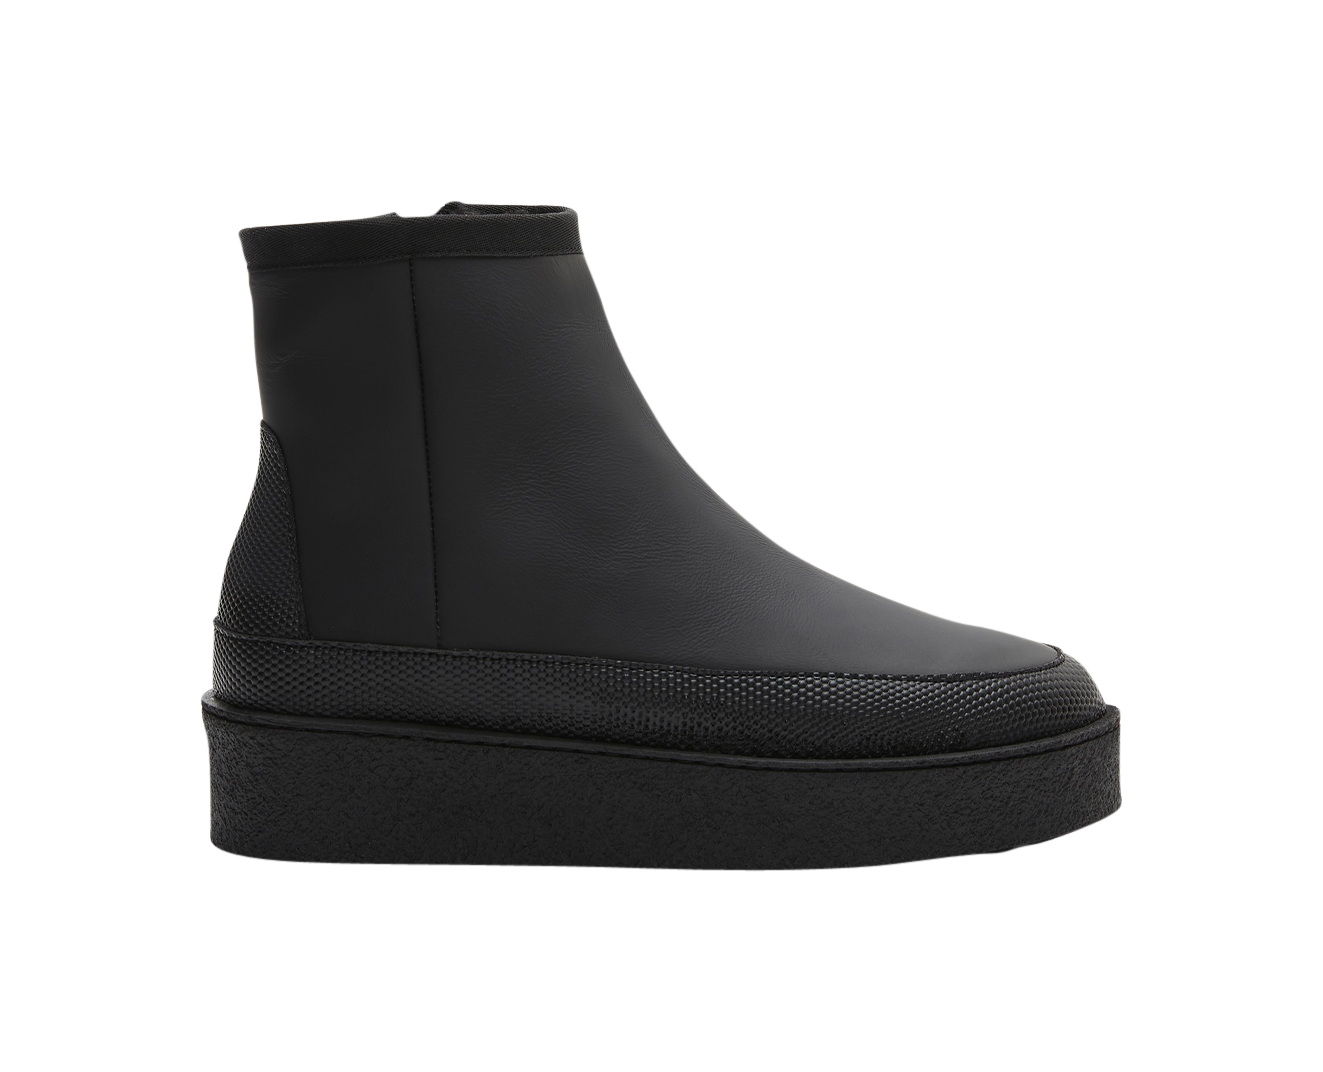 Aria Coated Leather Black Chelsea Boots 1020919126-014 - 07